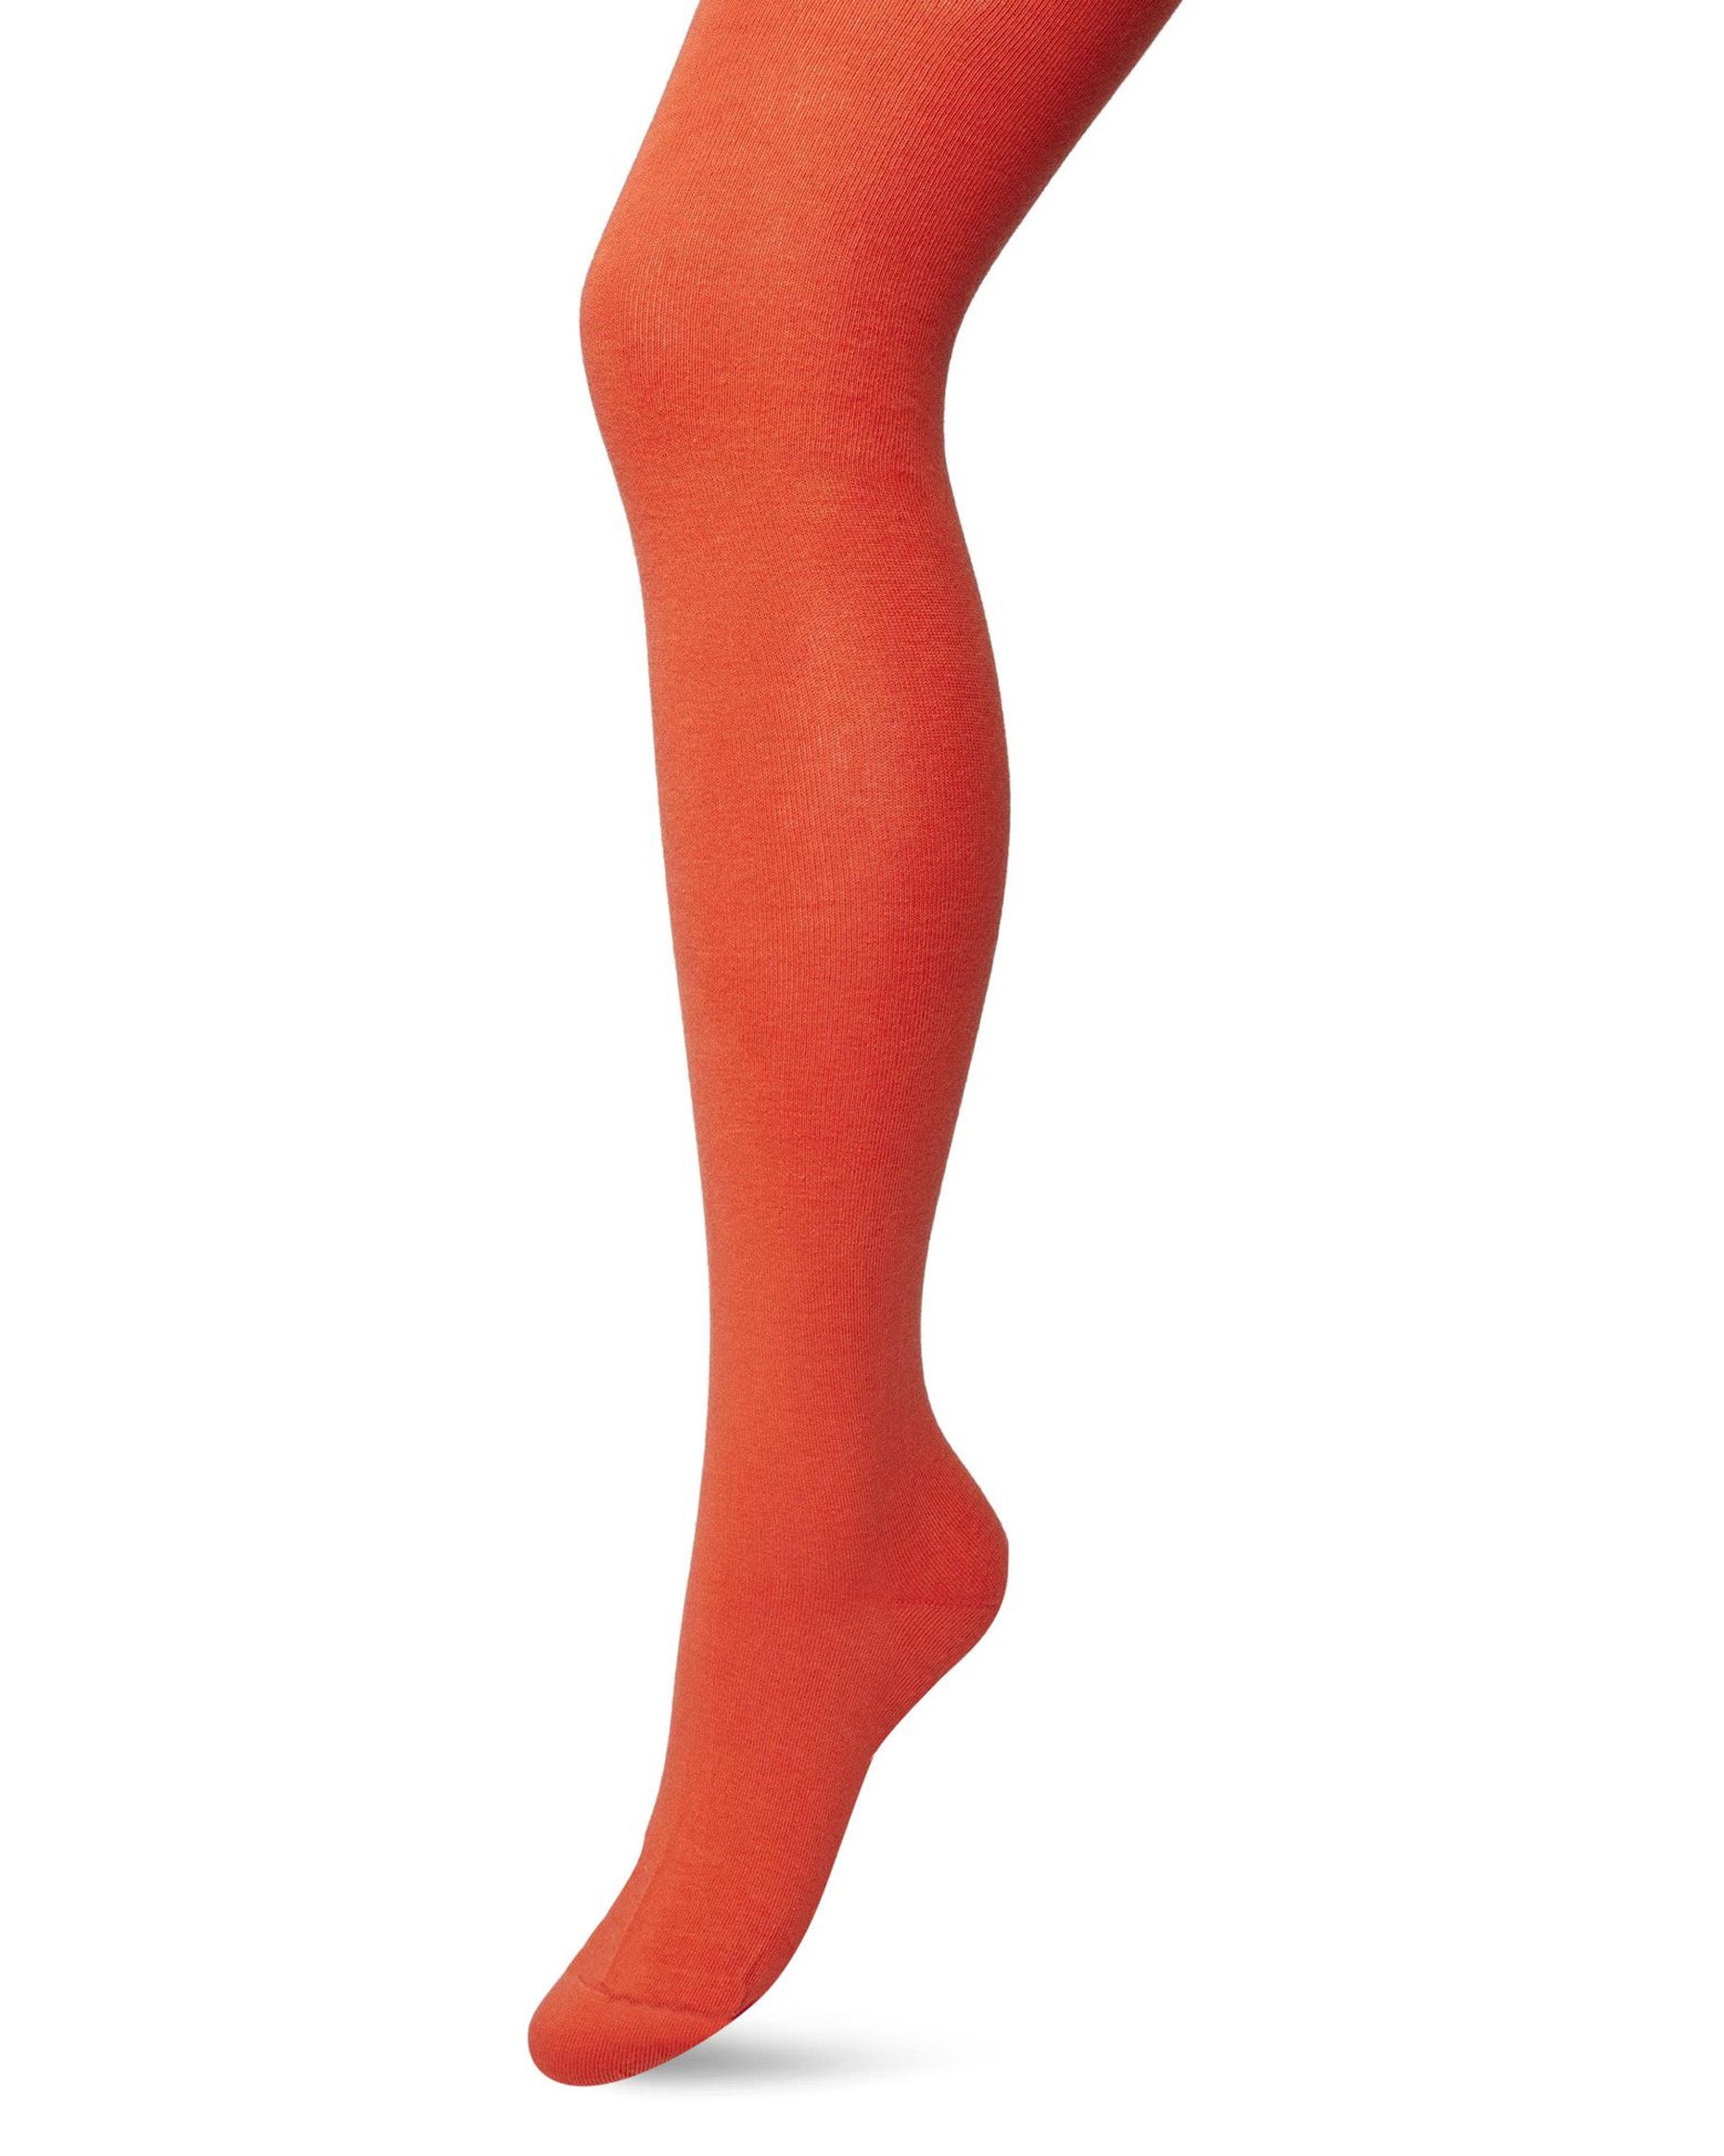 Bonnie Doon Bio Cotton Tights - Bright orange (poinciana) warm and soft knitted organic cotton Winter thermal tights.